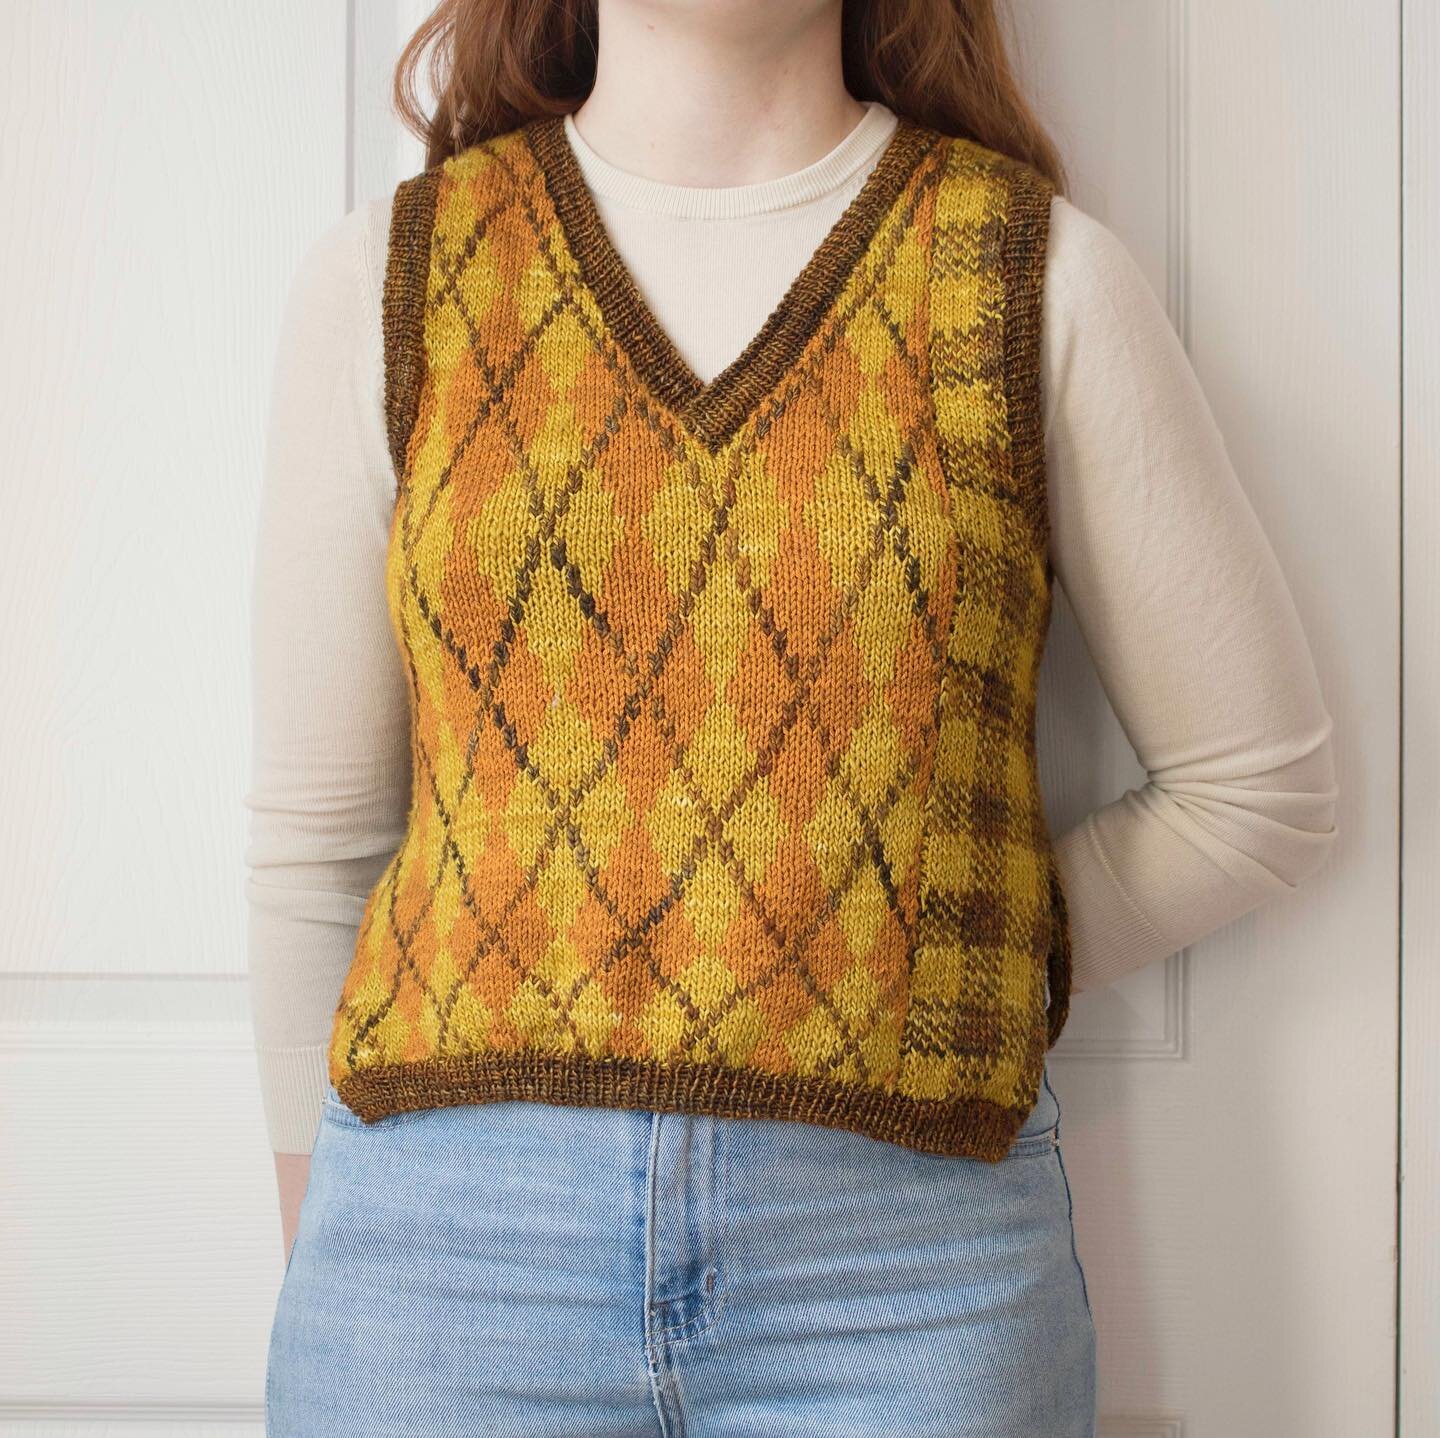 patchwork sweater vest in three colors... and it&rsquo;s reversible!  should I make more?  should I make something else instead?  should I stop worrying about what I *should* be doing?  post-grad life is strange 🙃